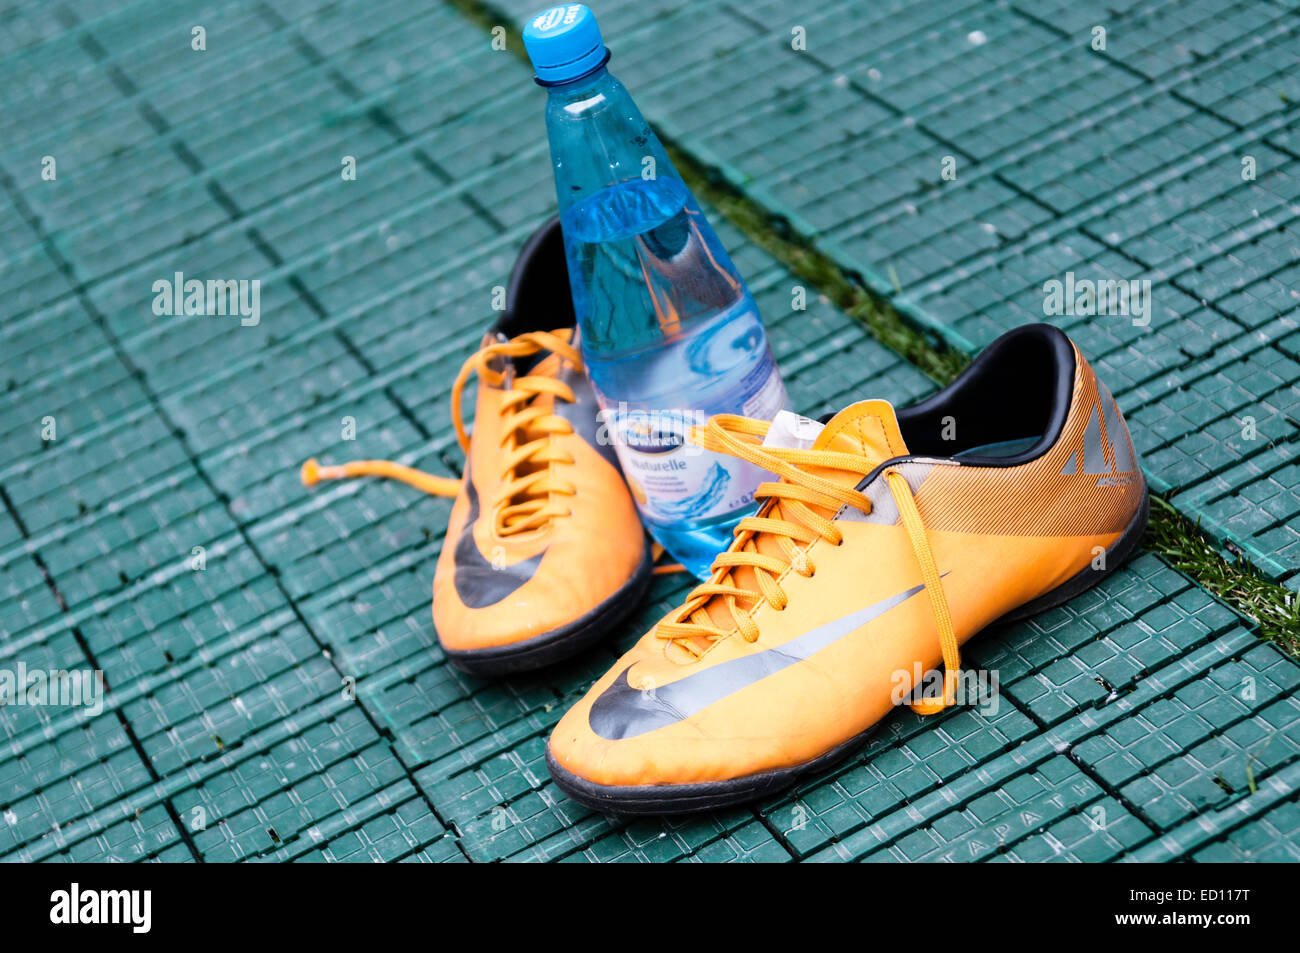 Nike Running Shoes High Resolution Stock Photography and Images - Alamy